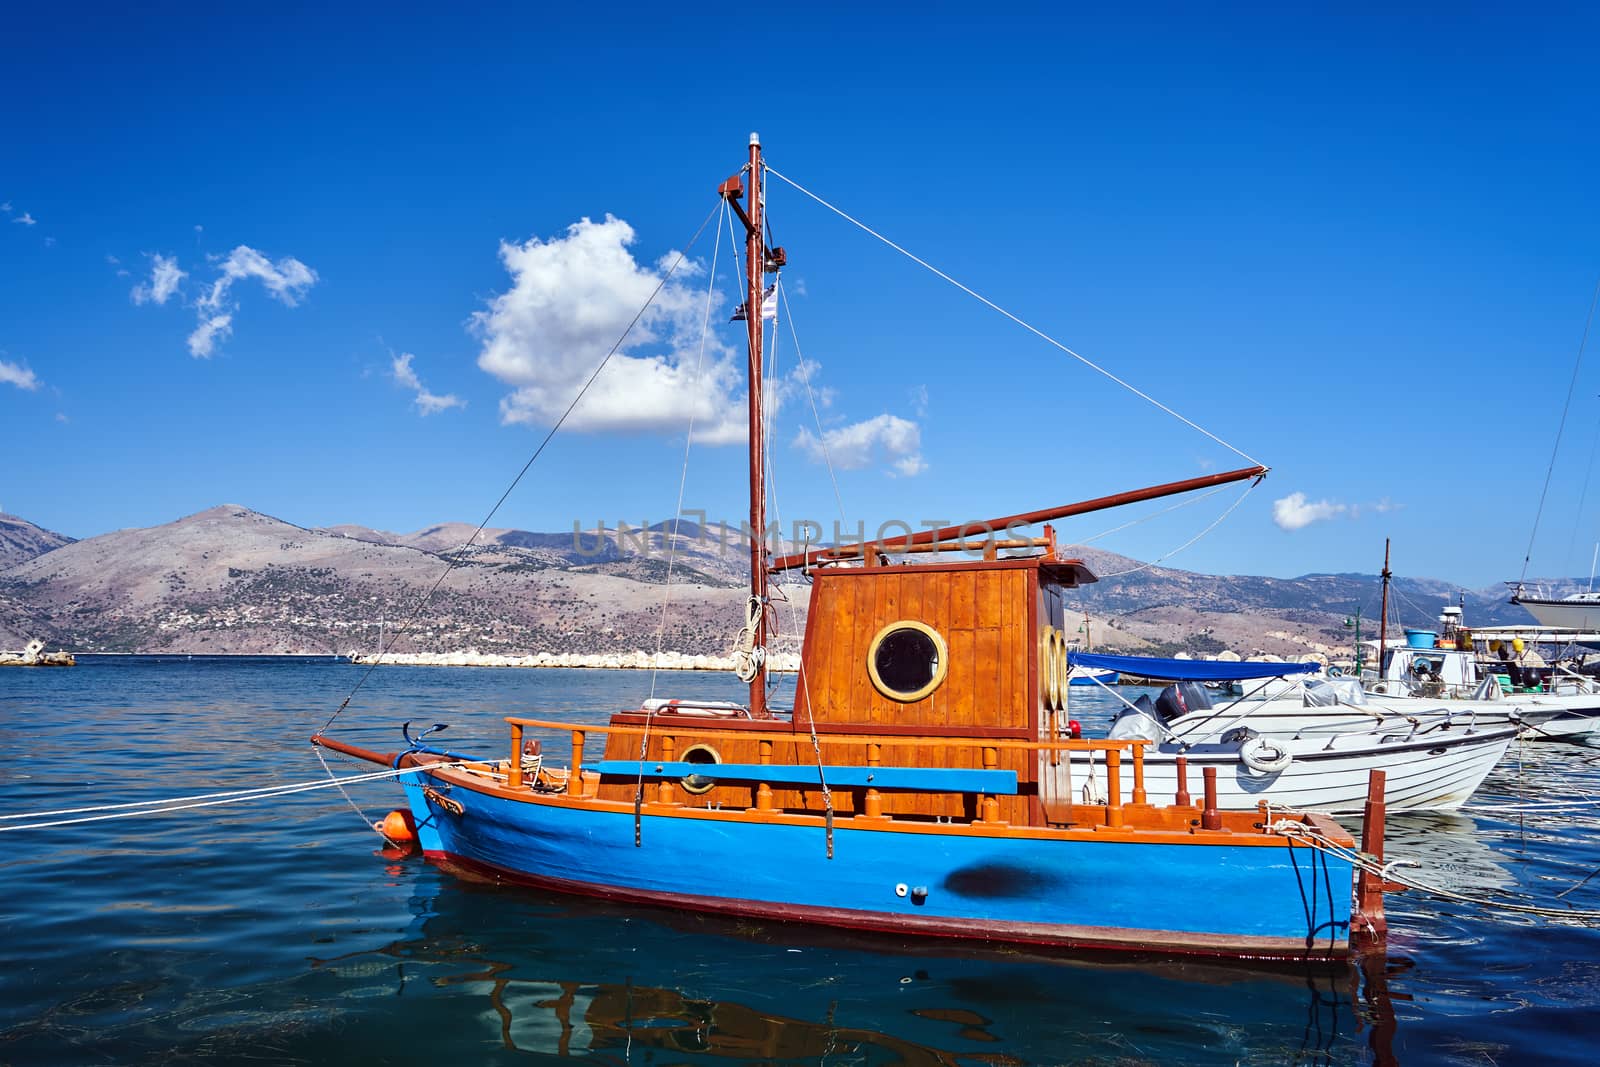 Wooden sailboat in the port of Lixouri on the island of Kefalonia in Greece